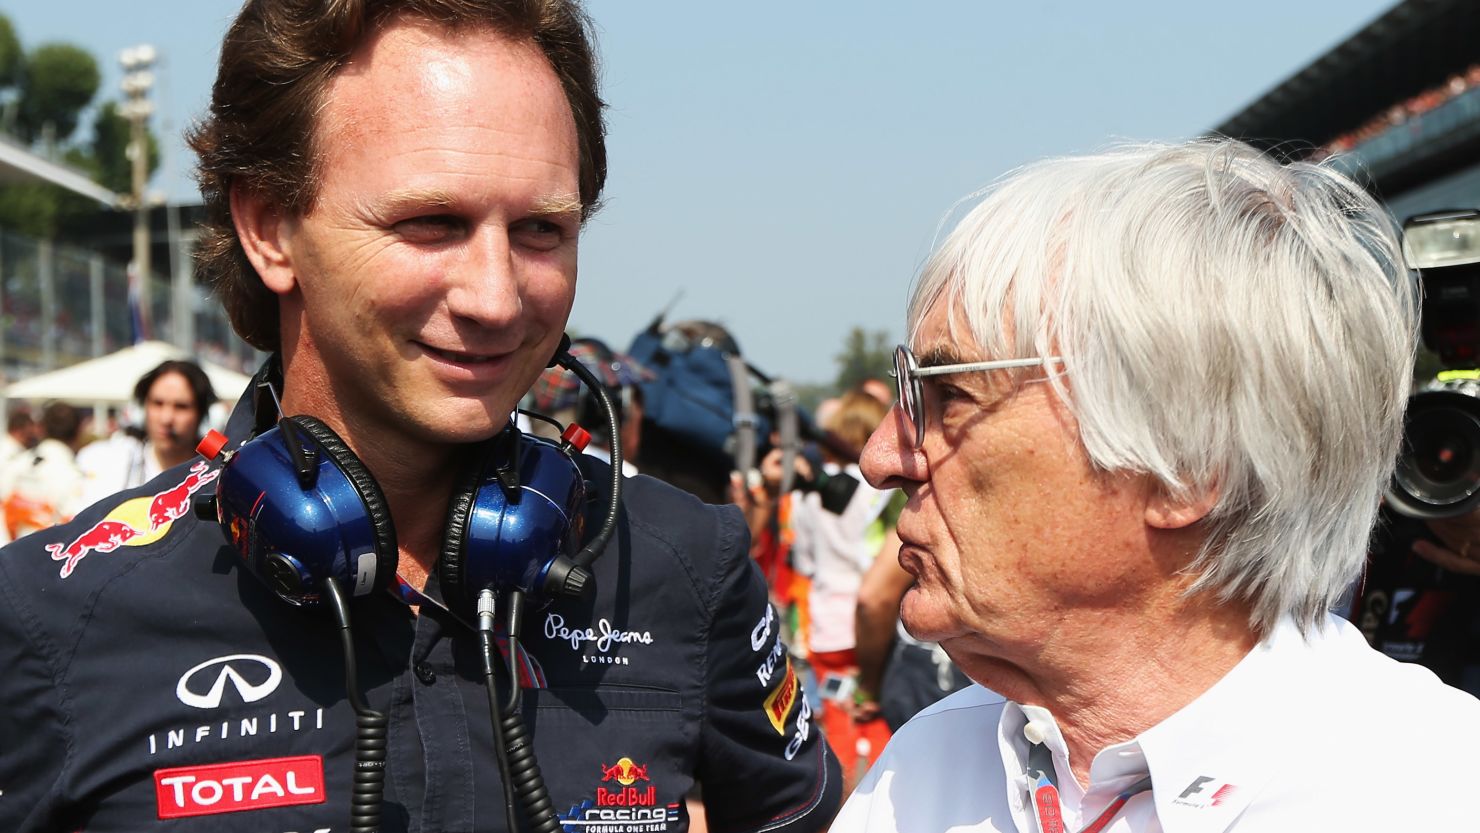 F1 chief Bernie Ecclestone suggested Christian Horner (left) could succeed him but the appointment is unlikely